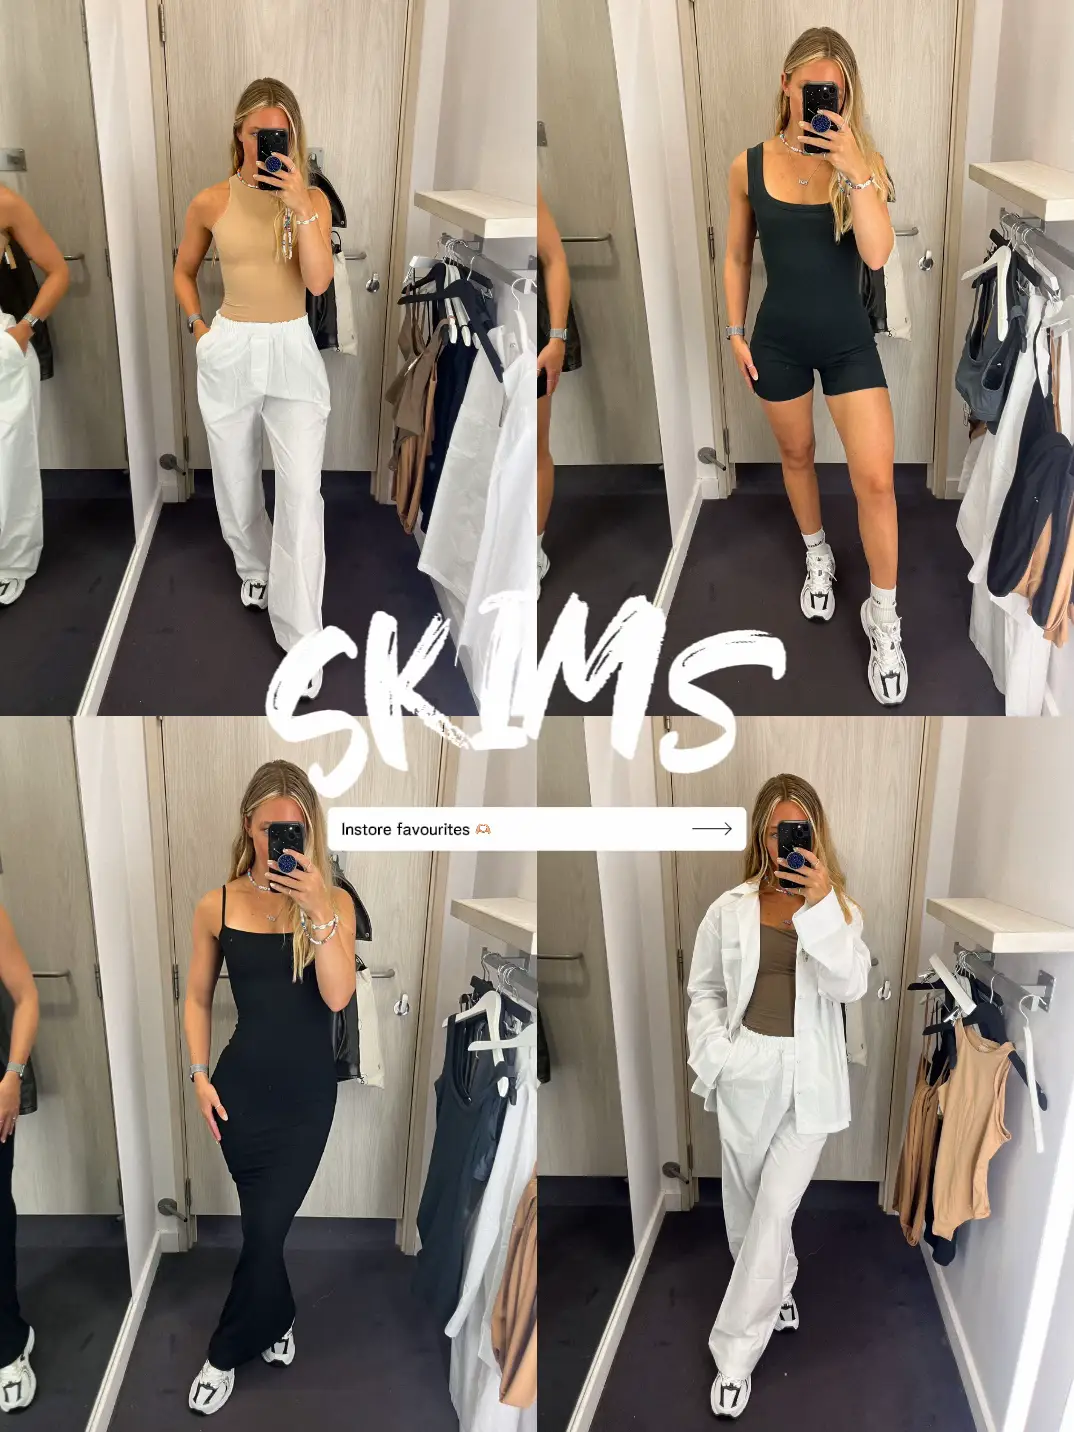 SKIMS COTTON BASICS HAUL 🤍🤍, Gallery posted by abby